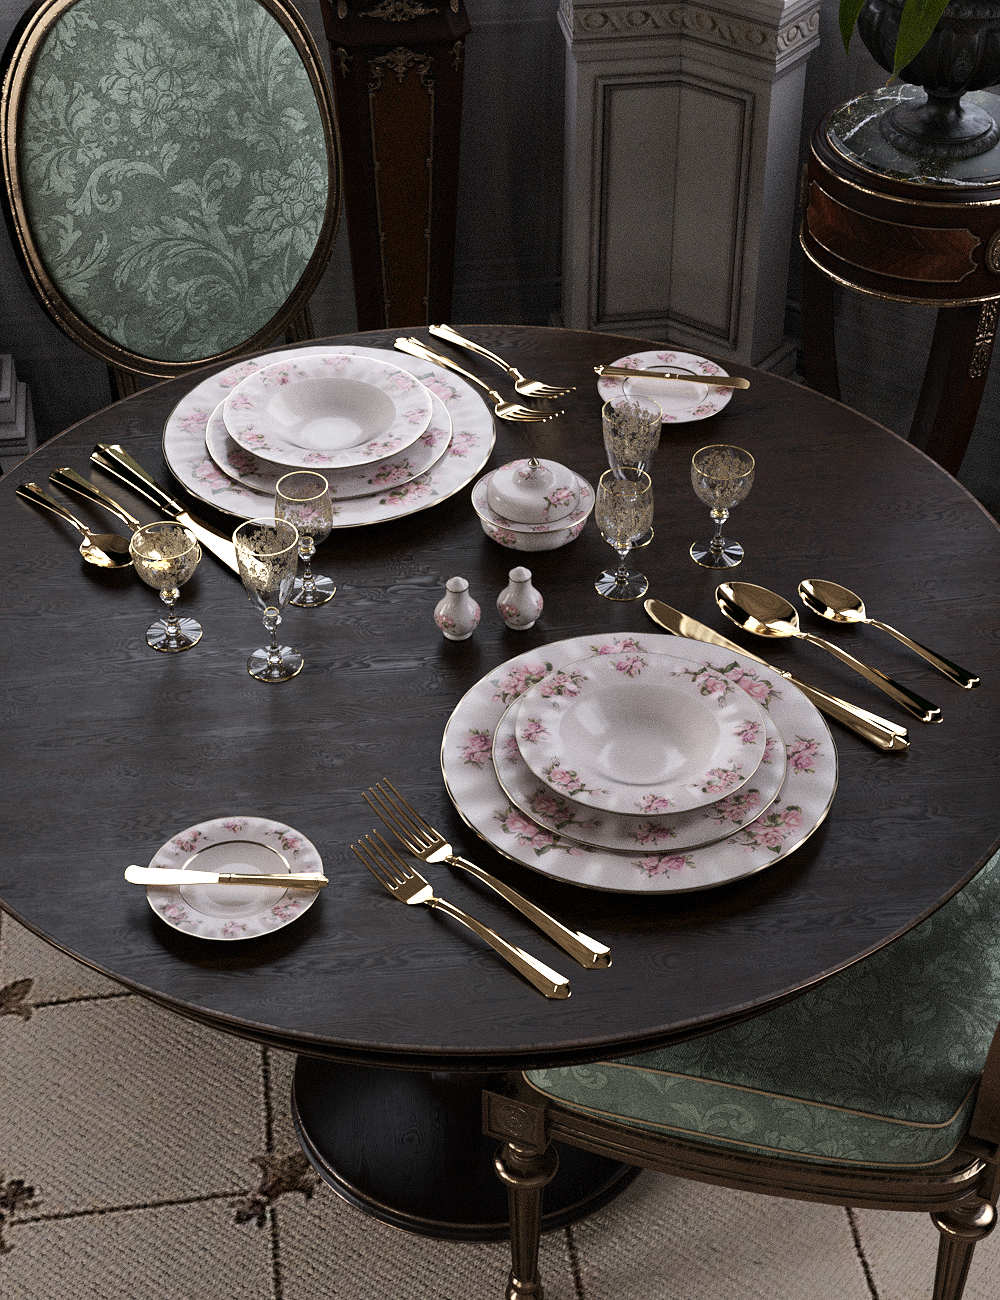 Patterns Vintage China 1 Iray by: LaurieS, 3D Models by Daz 3D